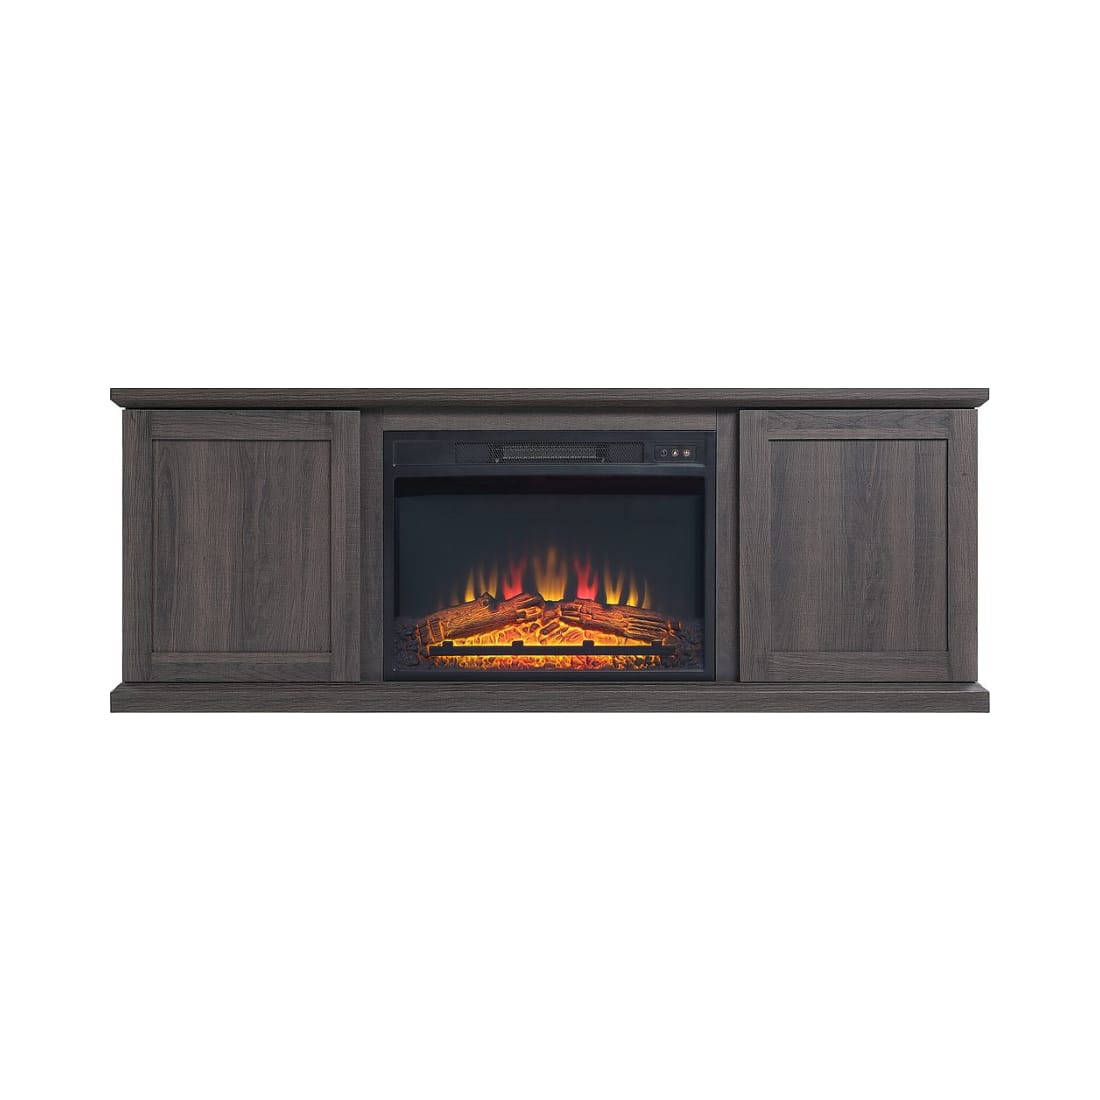 Franklin 60” Fireplace TV Stand in Heavy Brown